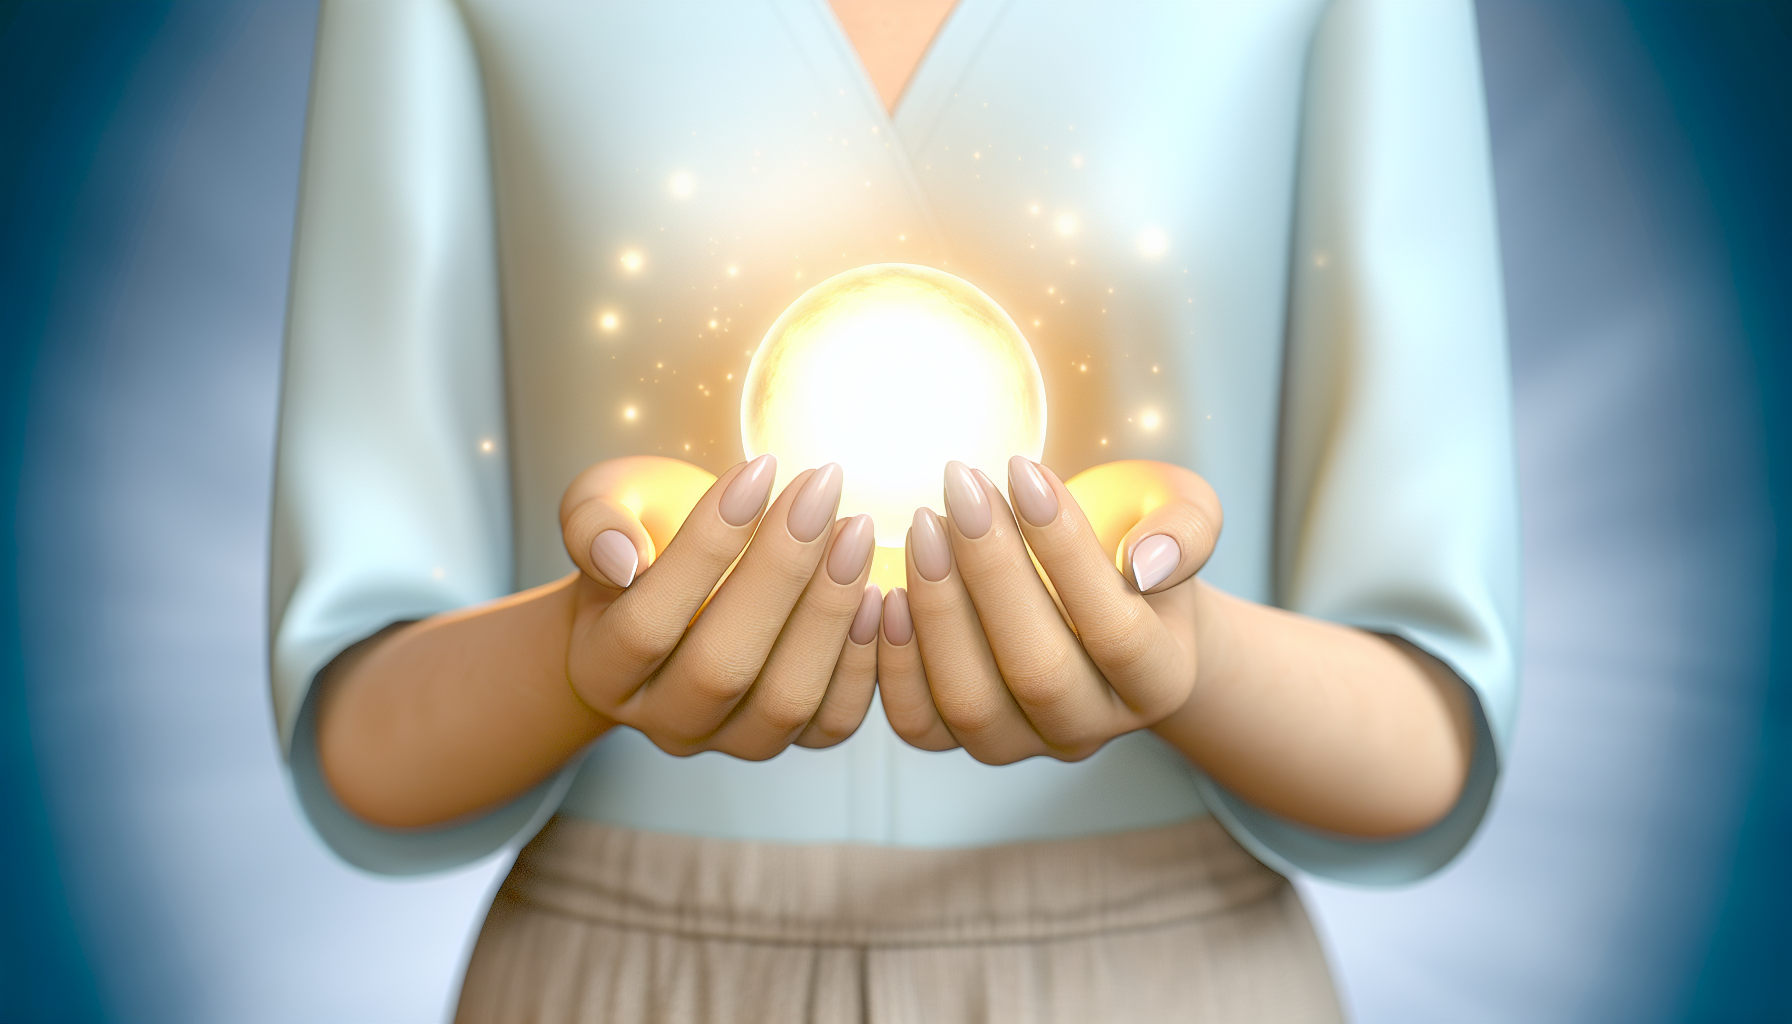 A healer's hands holding a glowing light, symbolizing the healing power and compassion